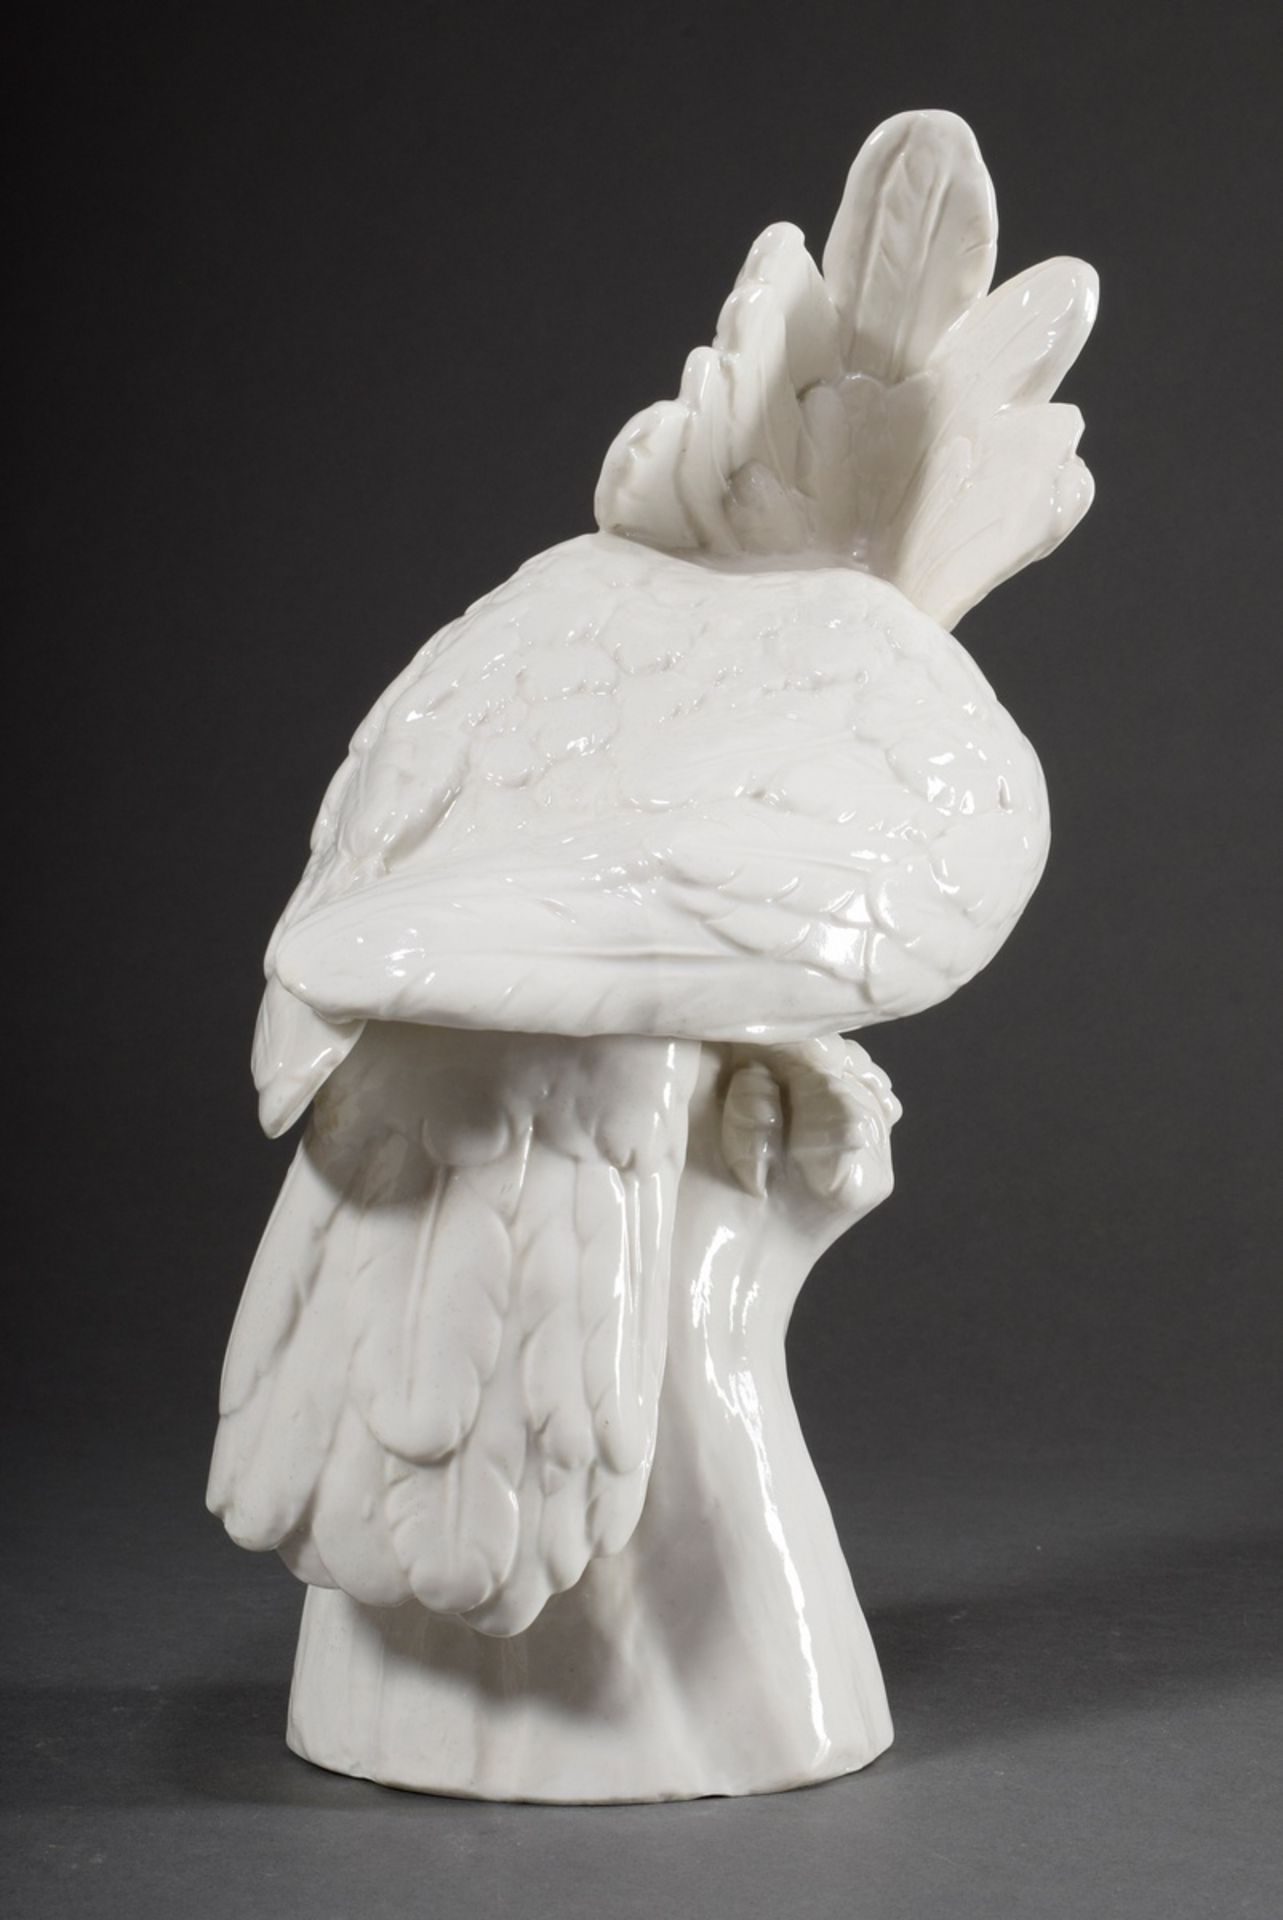 Nymphenburg "Cockatoo with closed wings", white porcelain, incised no. 448, bossier no. 3, diamond- - Image 3 of 7